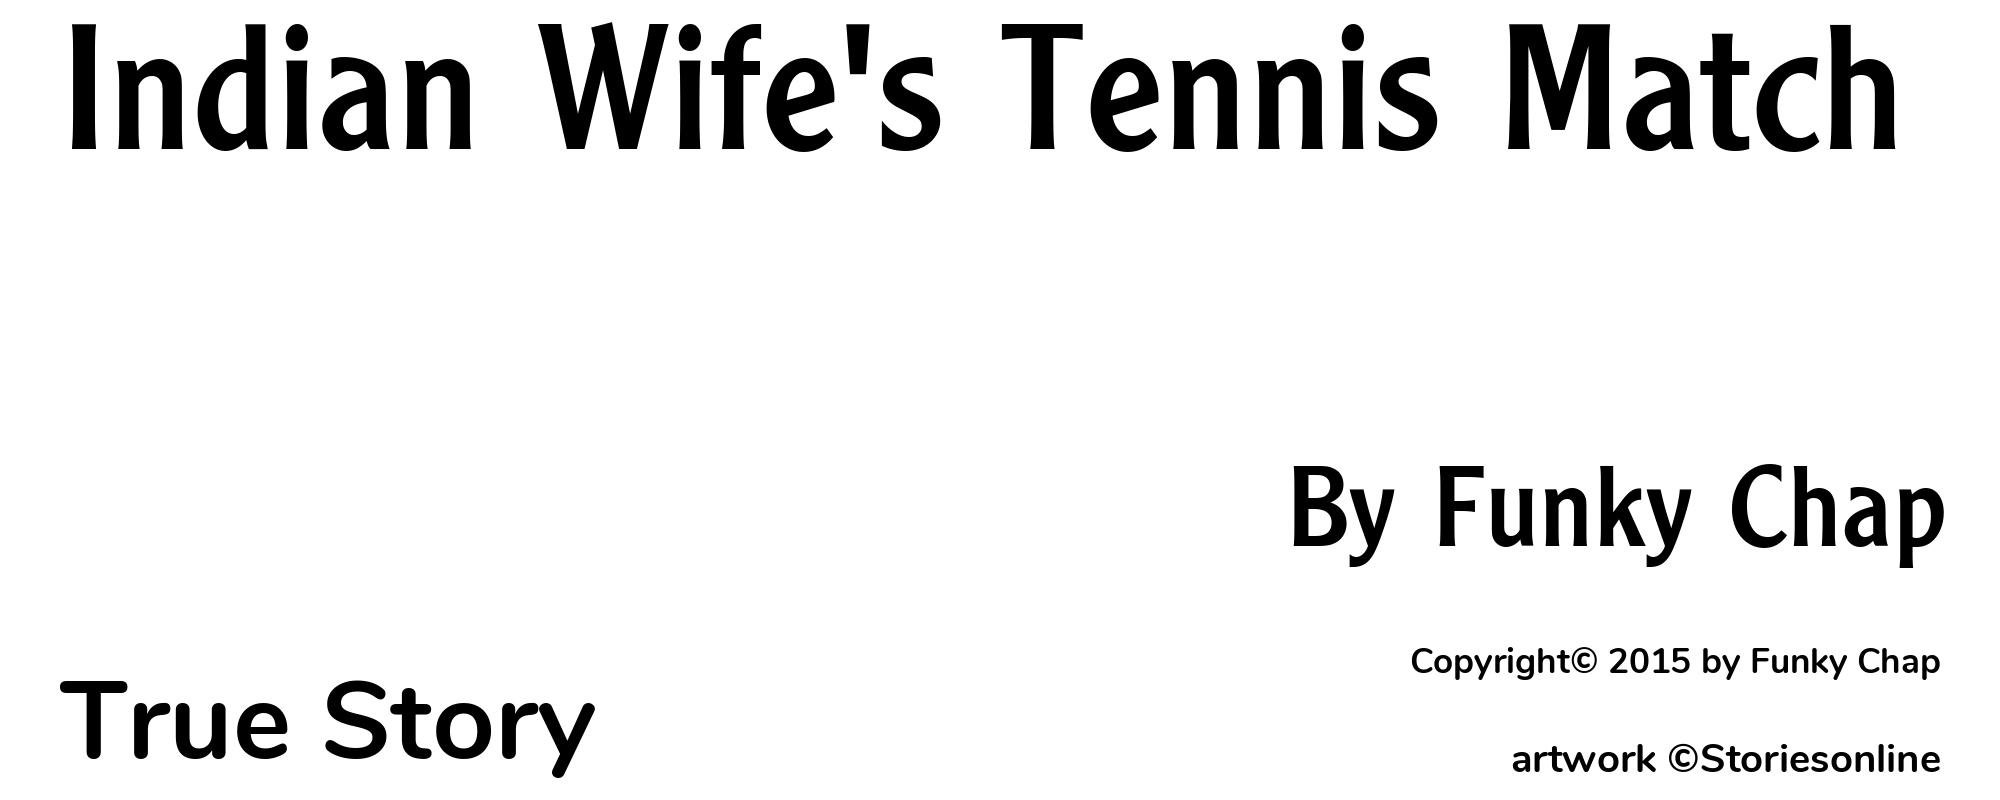 Indian Wife's Tennis Match - Cover